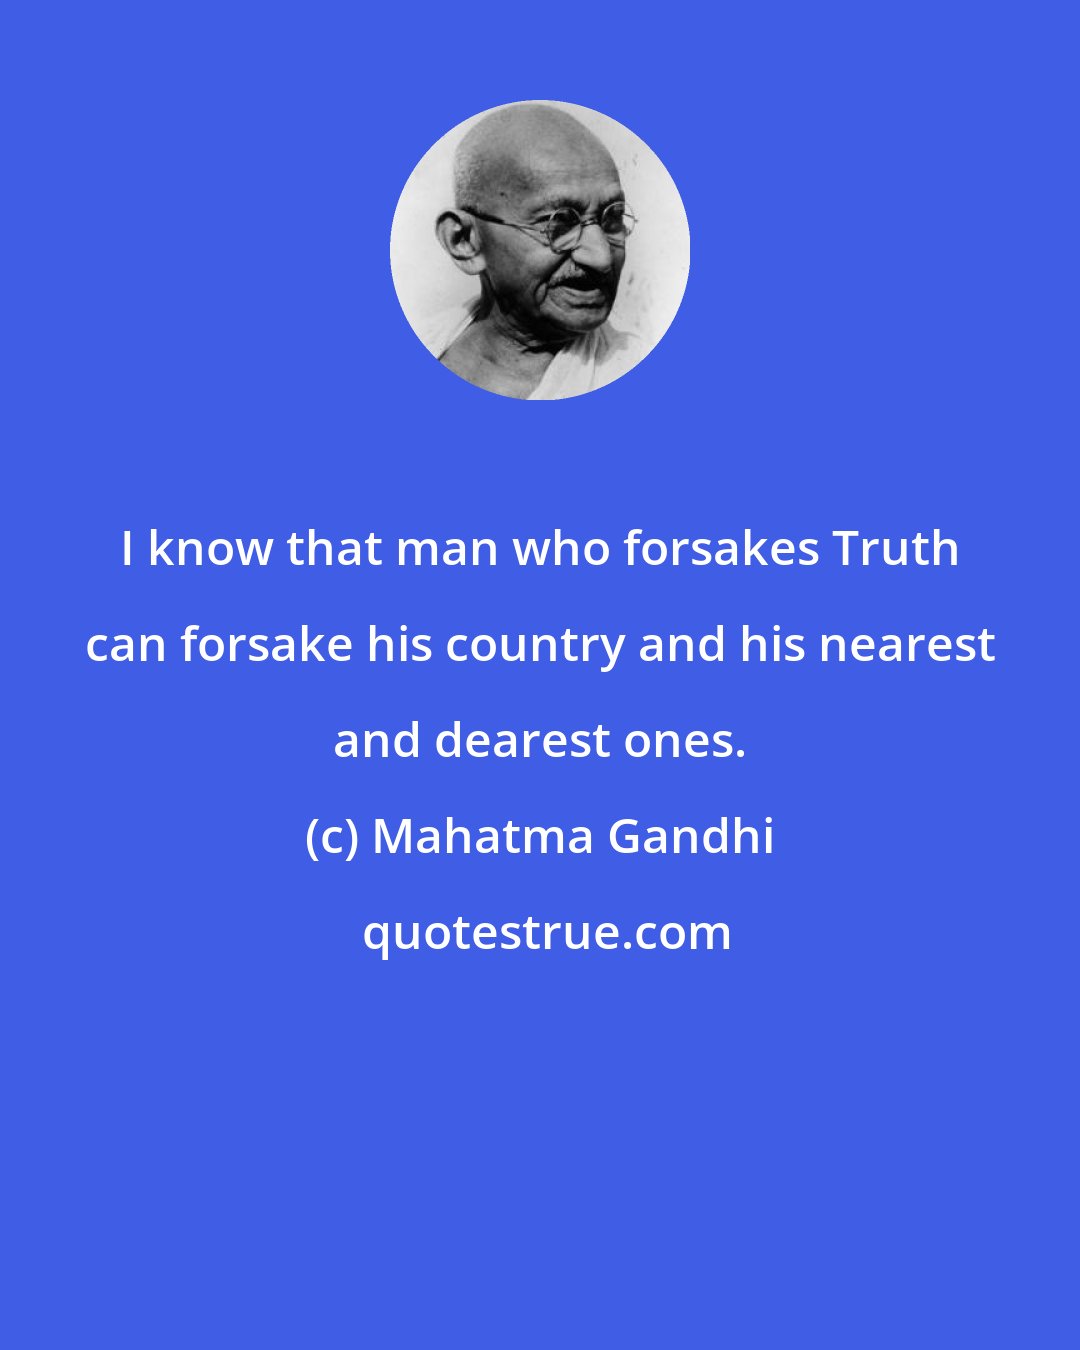 Mahatma Gandhi: I know that man who forsakes Truth can forsake his country and his nearest and dearest ones.